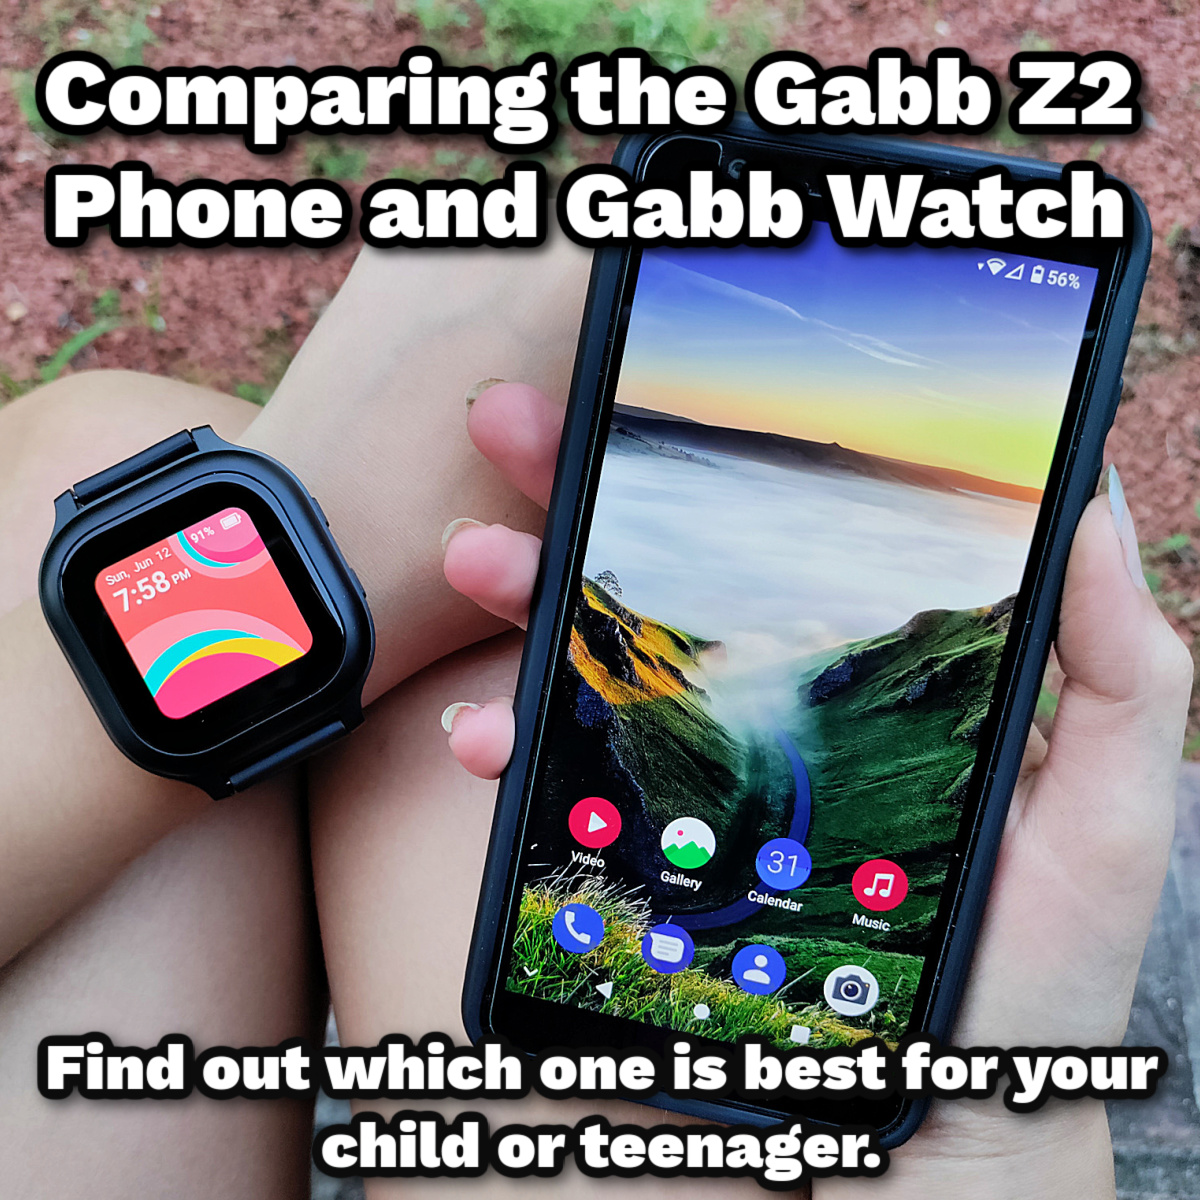 Comparing the Gabb phone and the Gabb watch